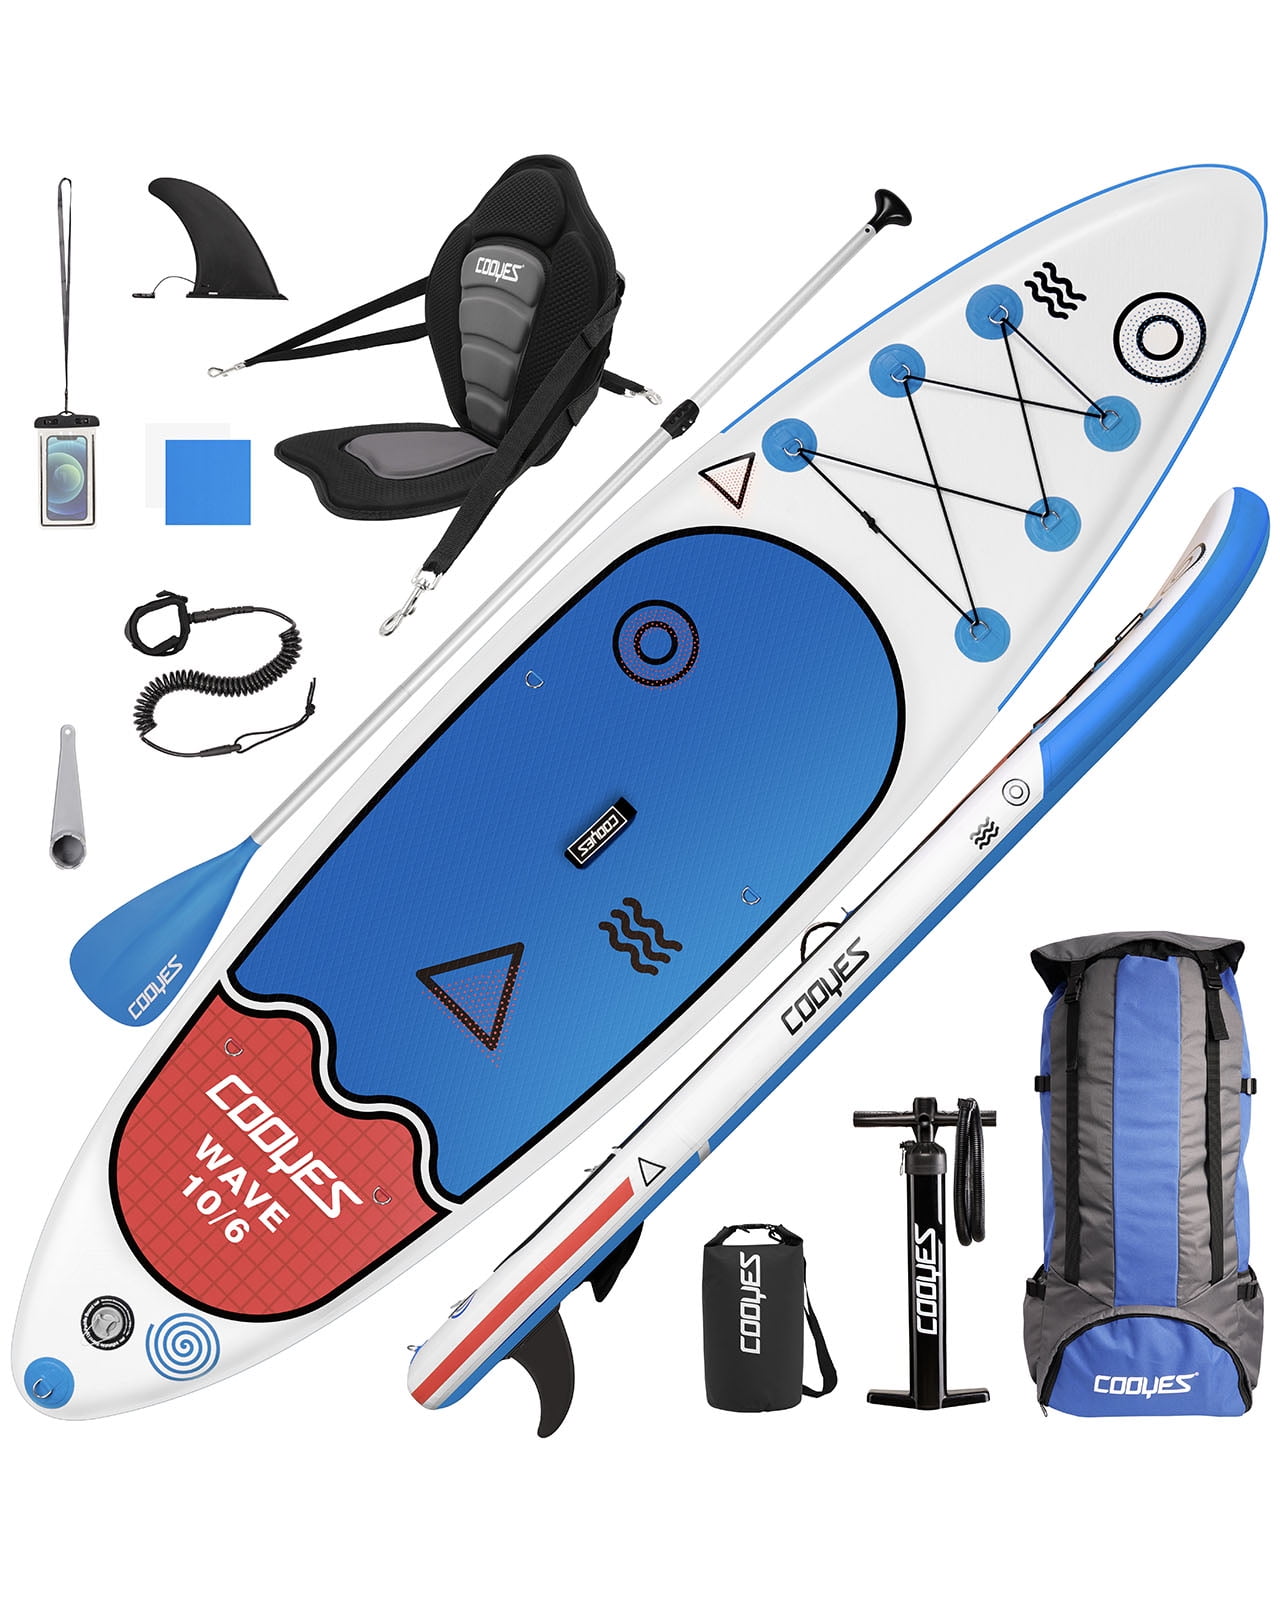 Waterproof Bag surfstar Inflatable Stand Up Paddle Board Dual Action Pump Floating Paddle 10’6’’x33’’x6” SUP Paddle Board for Adult Lightweight ISUP Board with Premium Ankle Leash Backpack